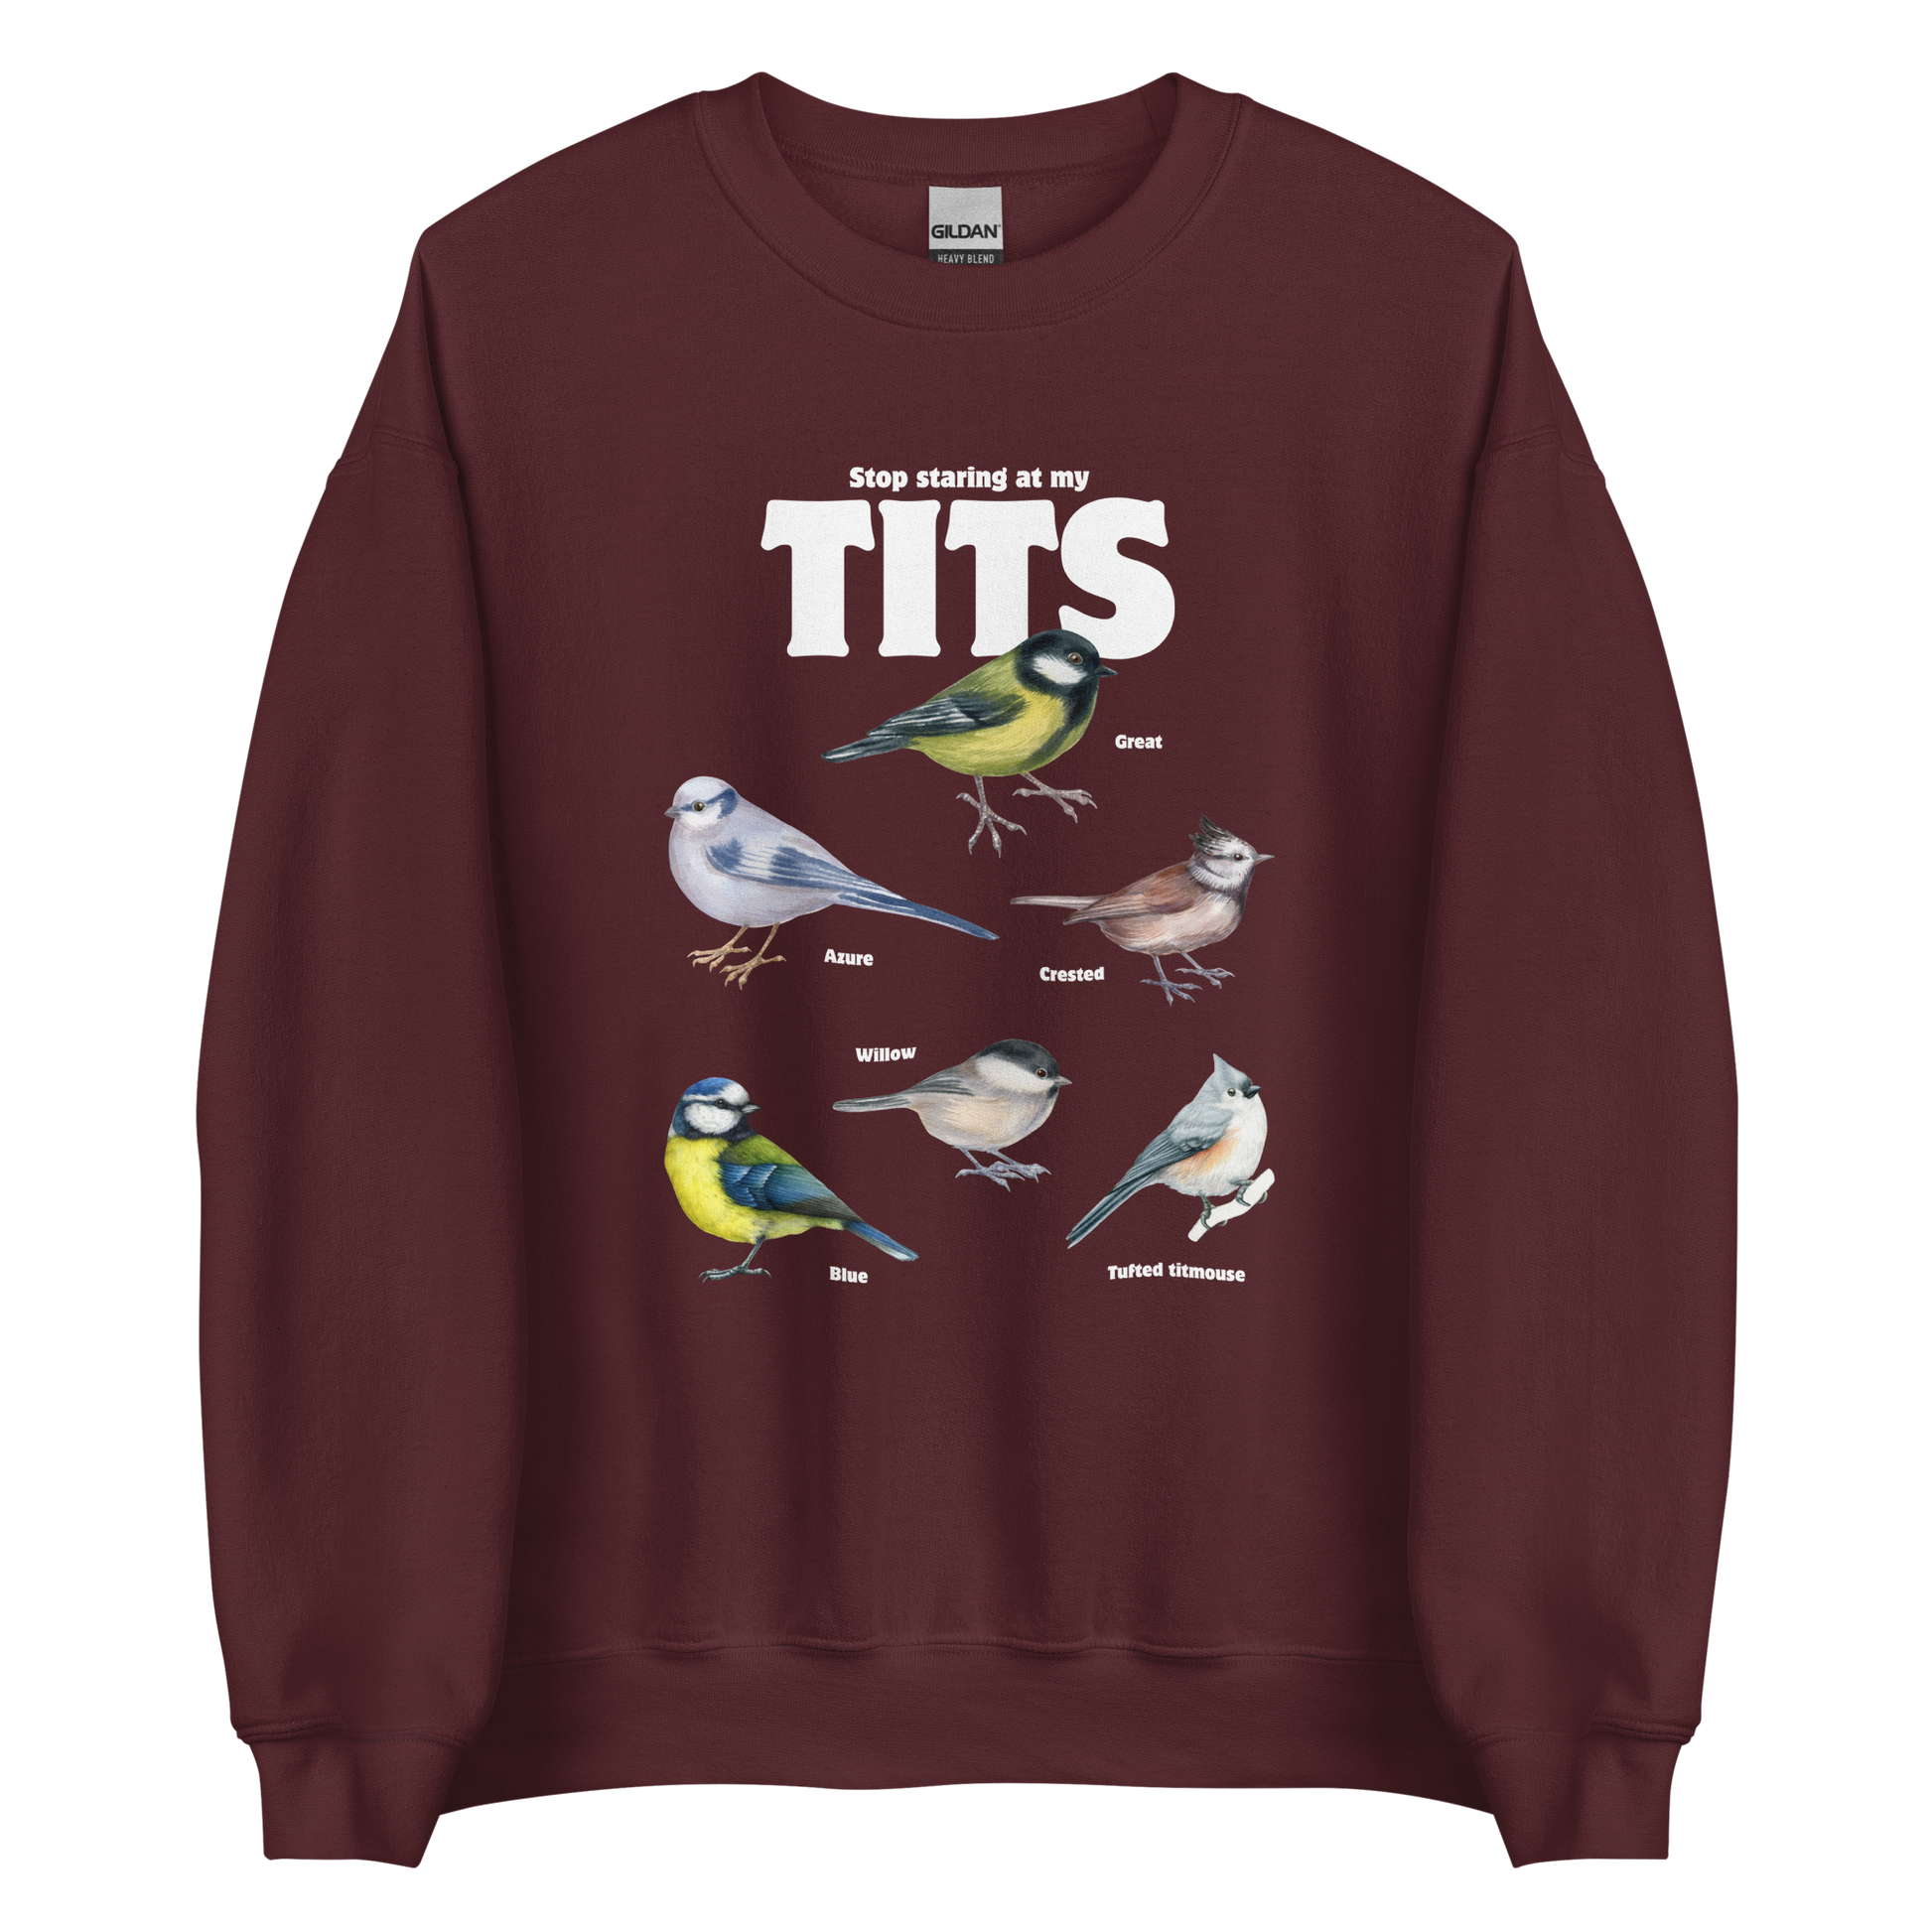 Maroon Tit Sweatshirt featuring a funny Stop Staring At My Tits graphic on the chest - Funny Graphic Tit Bird Sweatshirts - Boozy Fox